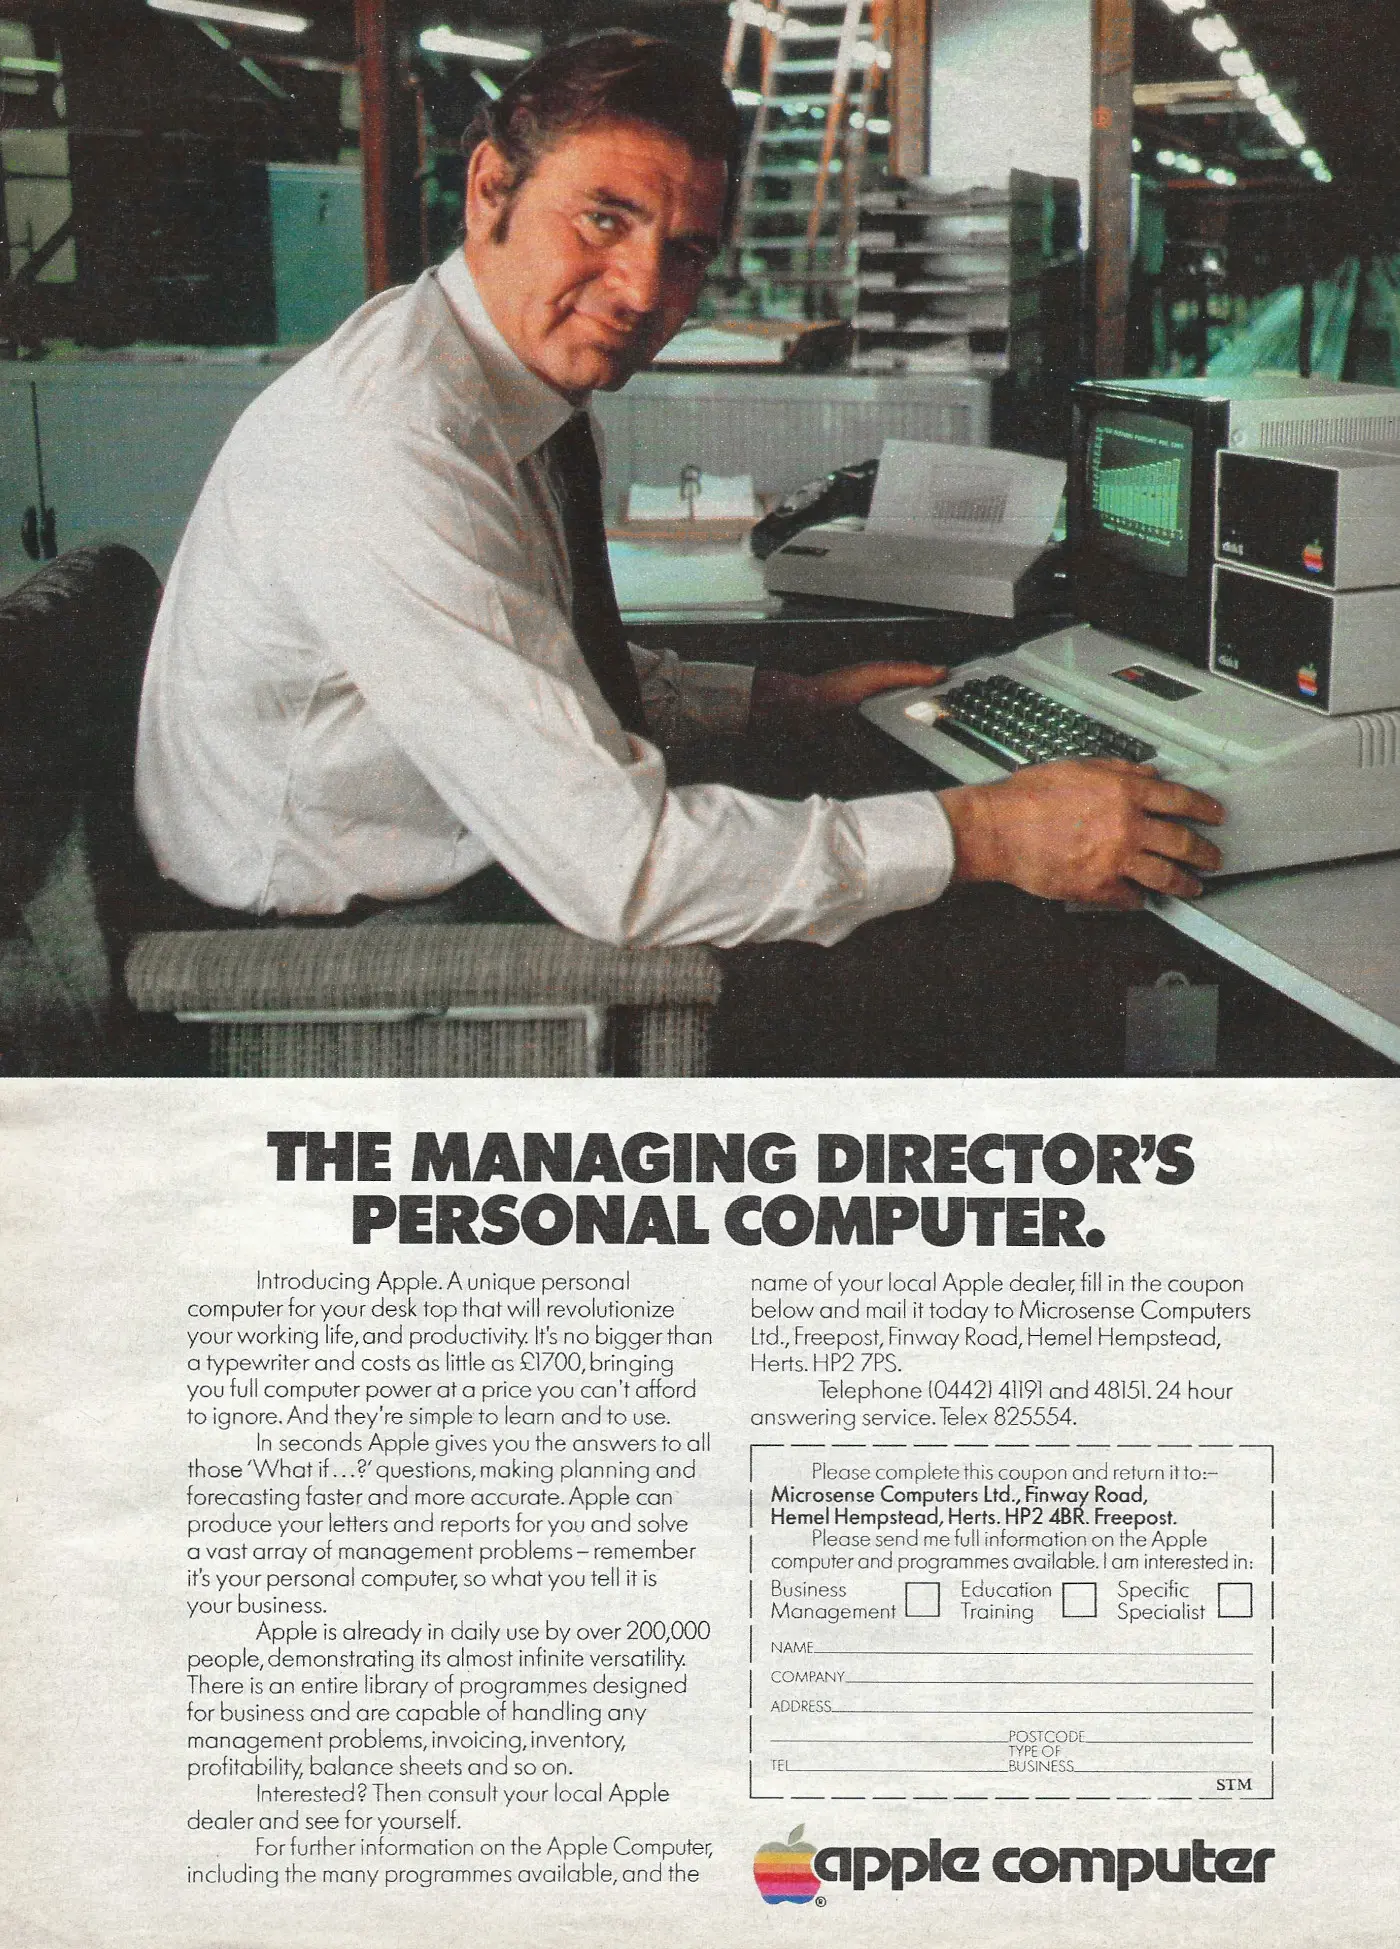 Apple Advert: Apple II: The Managing Director's Personal Computer, from Sunday Telegraph, 1981